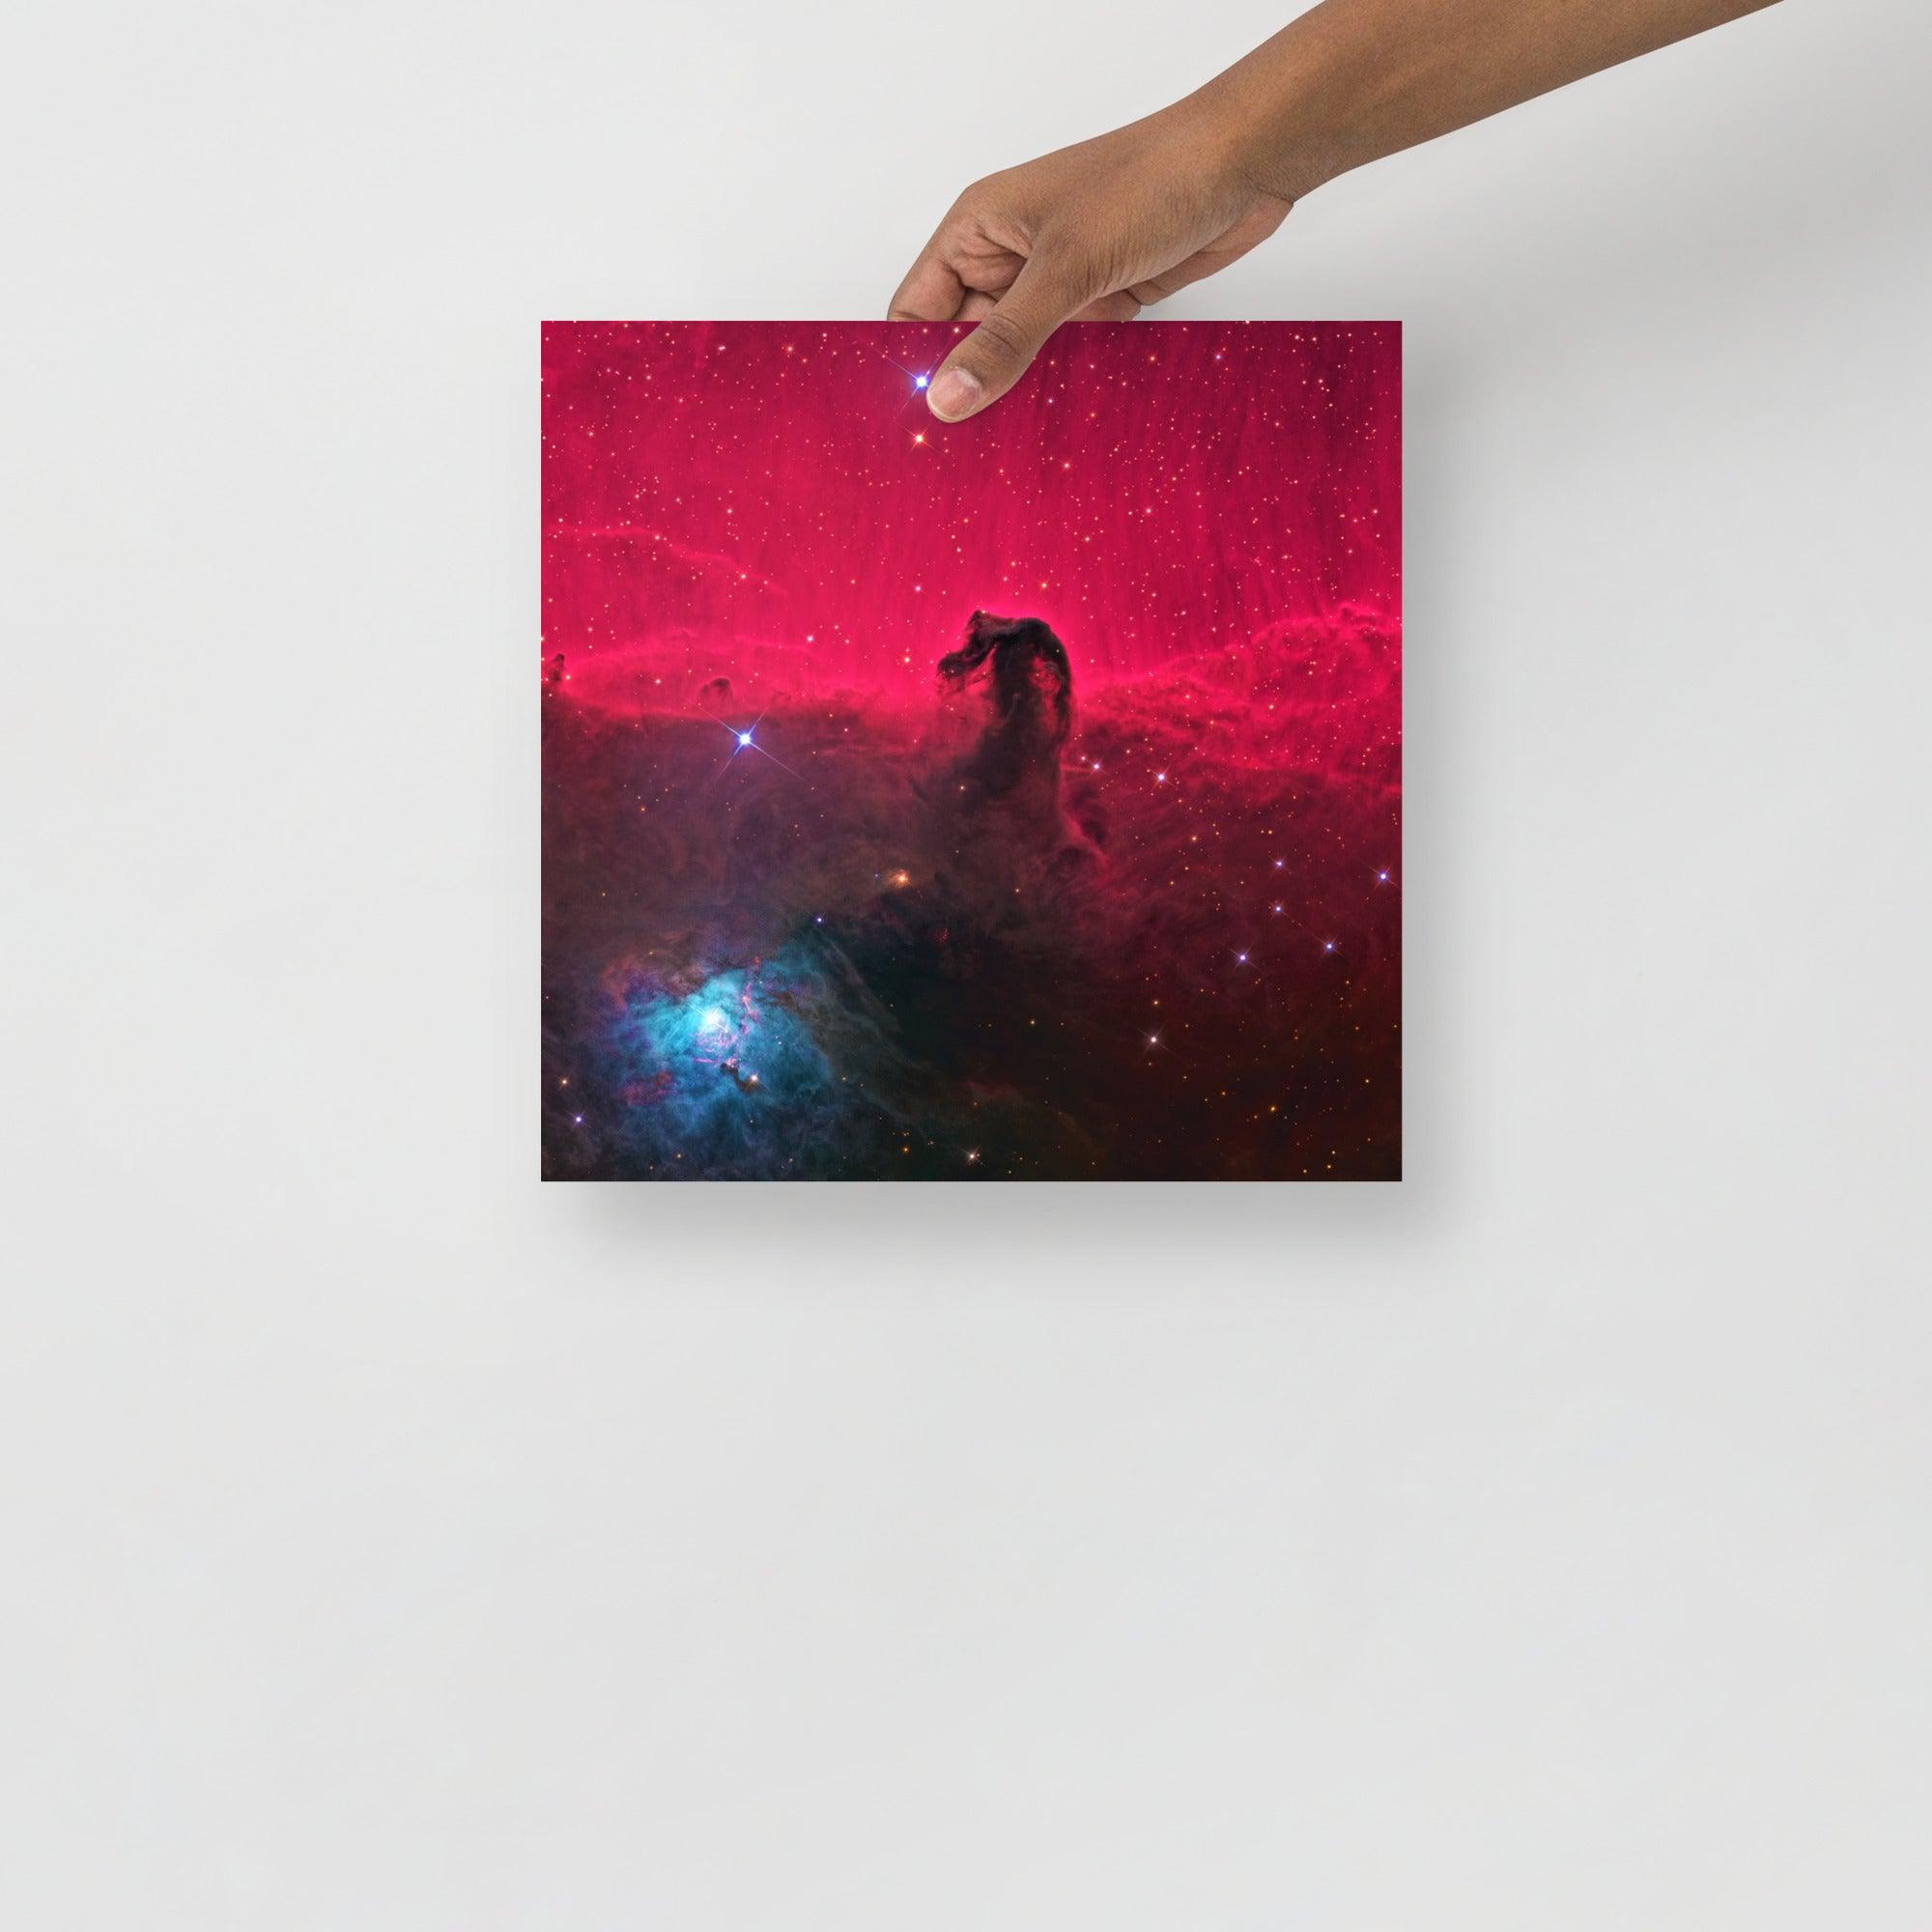 A Horsehead Nebula poster on a plain backdrop in size 12x12”.